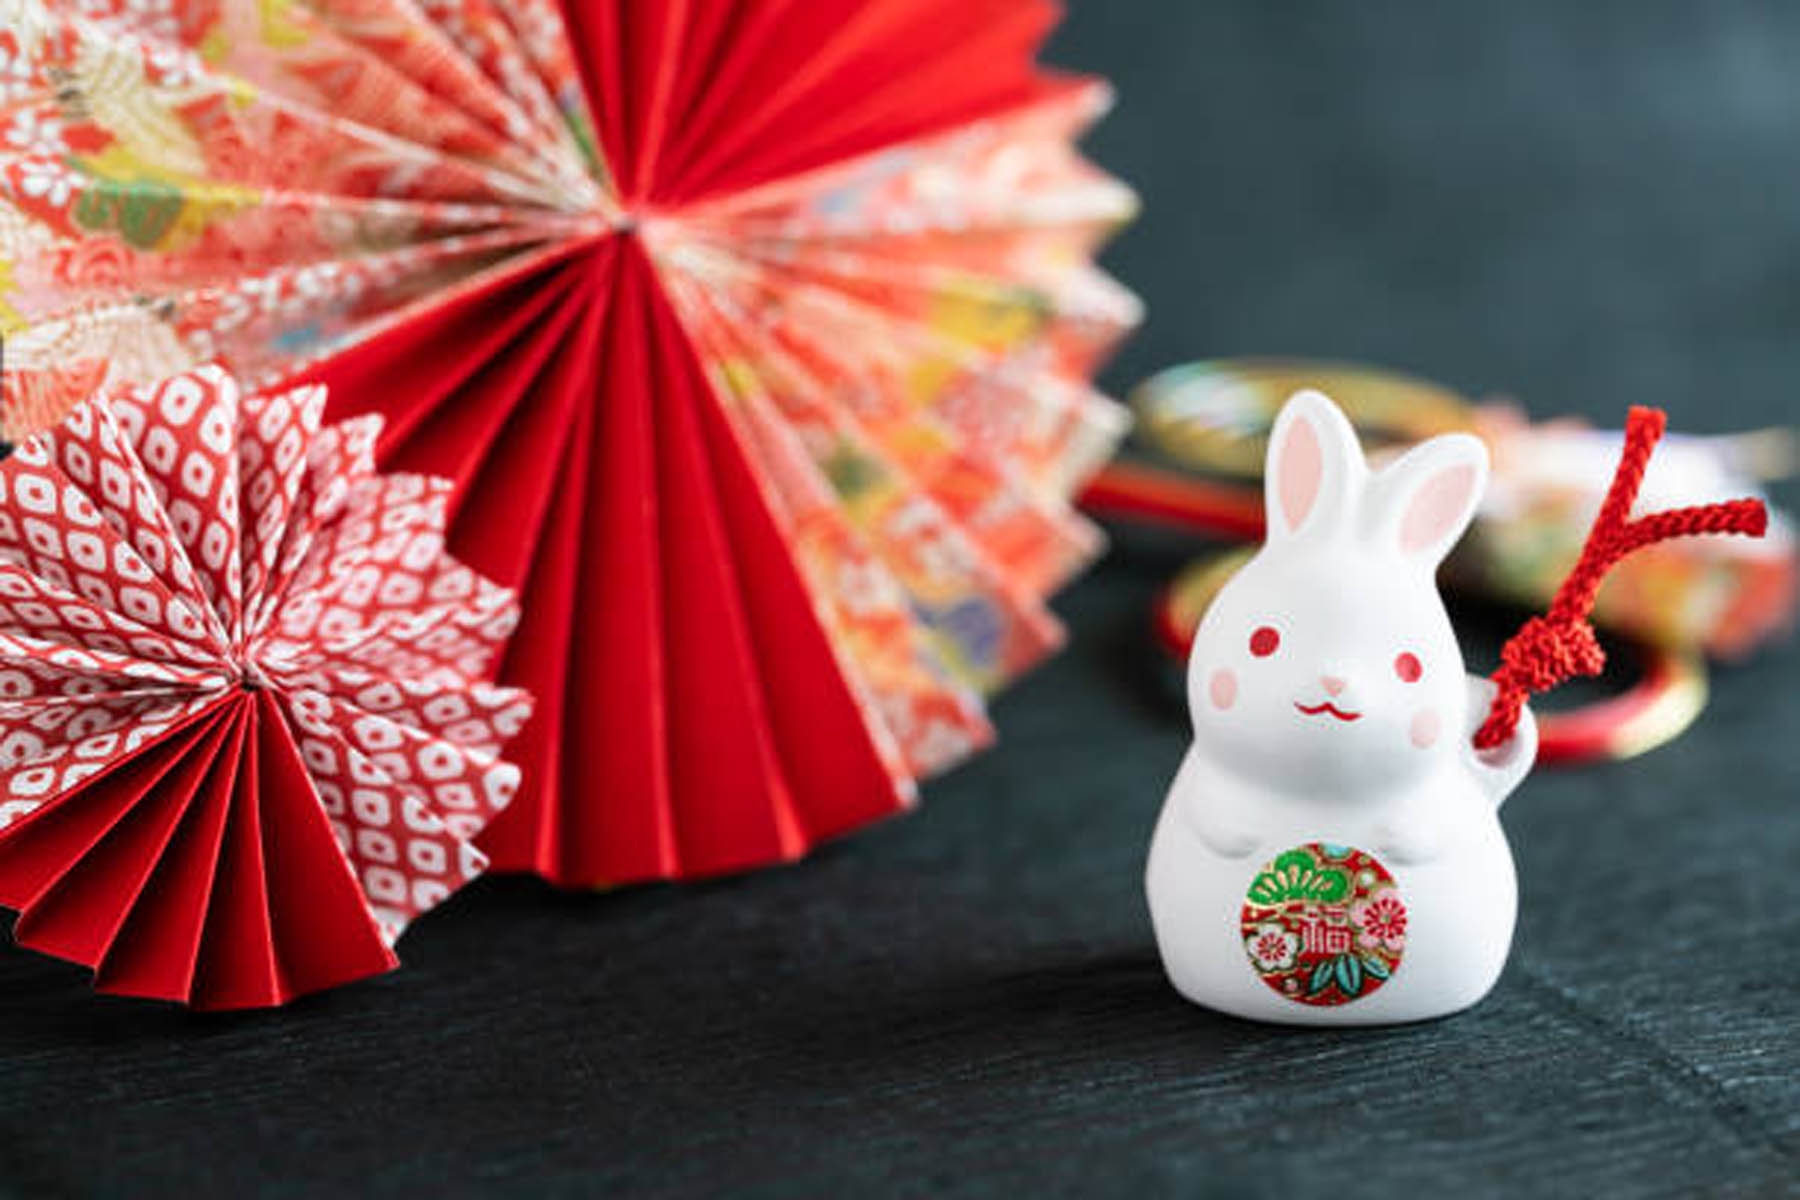 Year of the Rabbit: What does the Chinese zodiac mean?